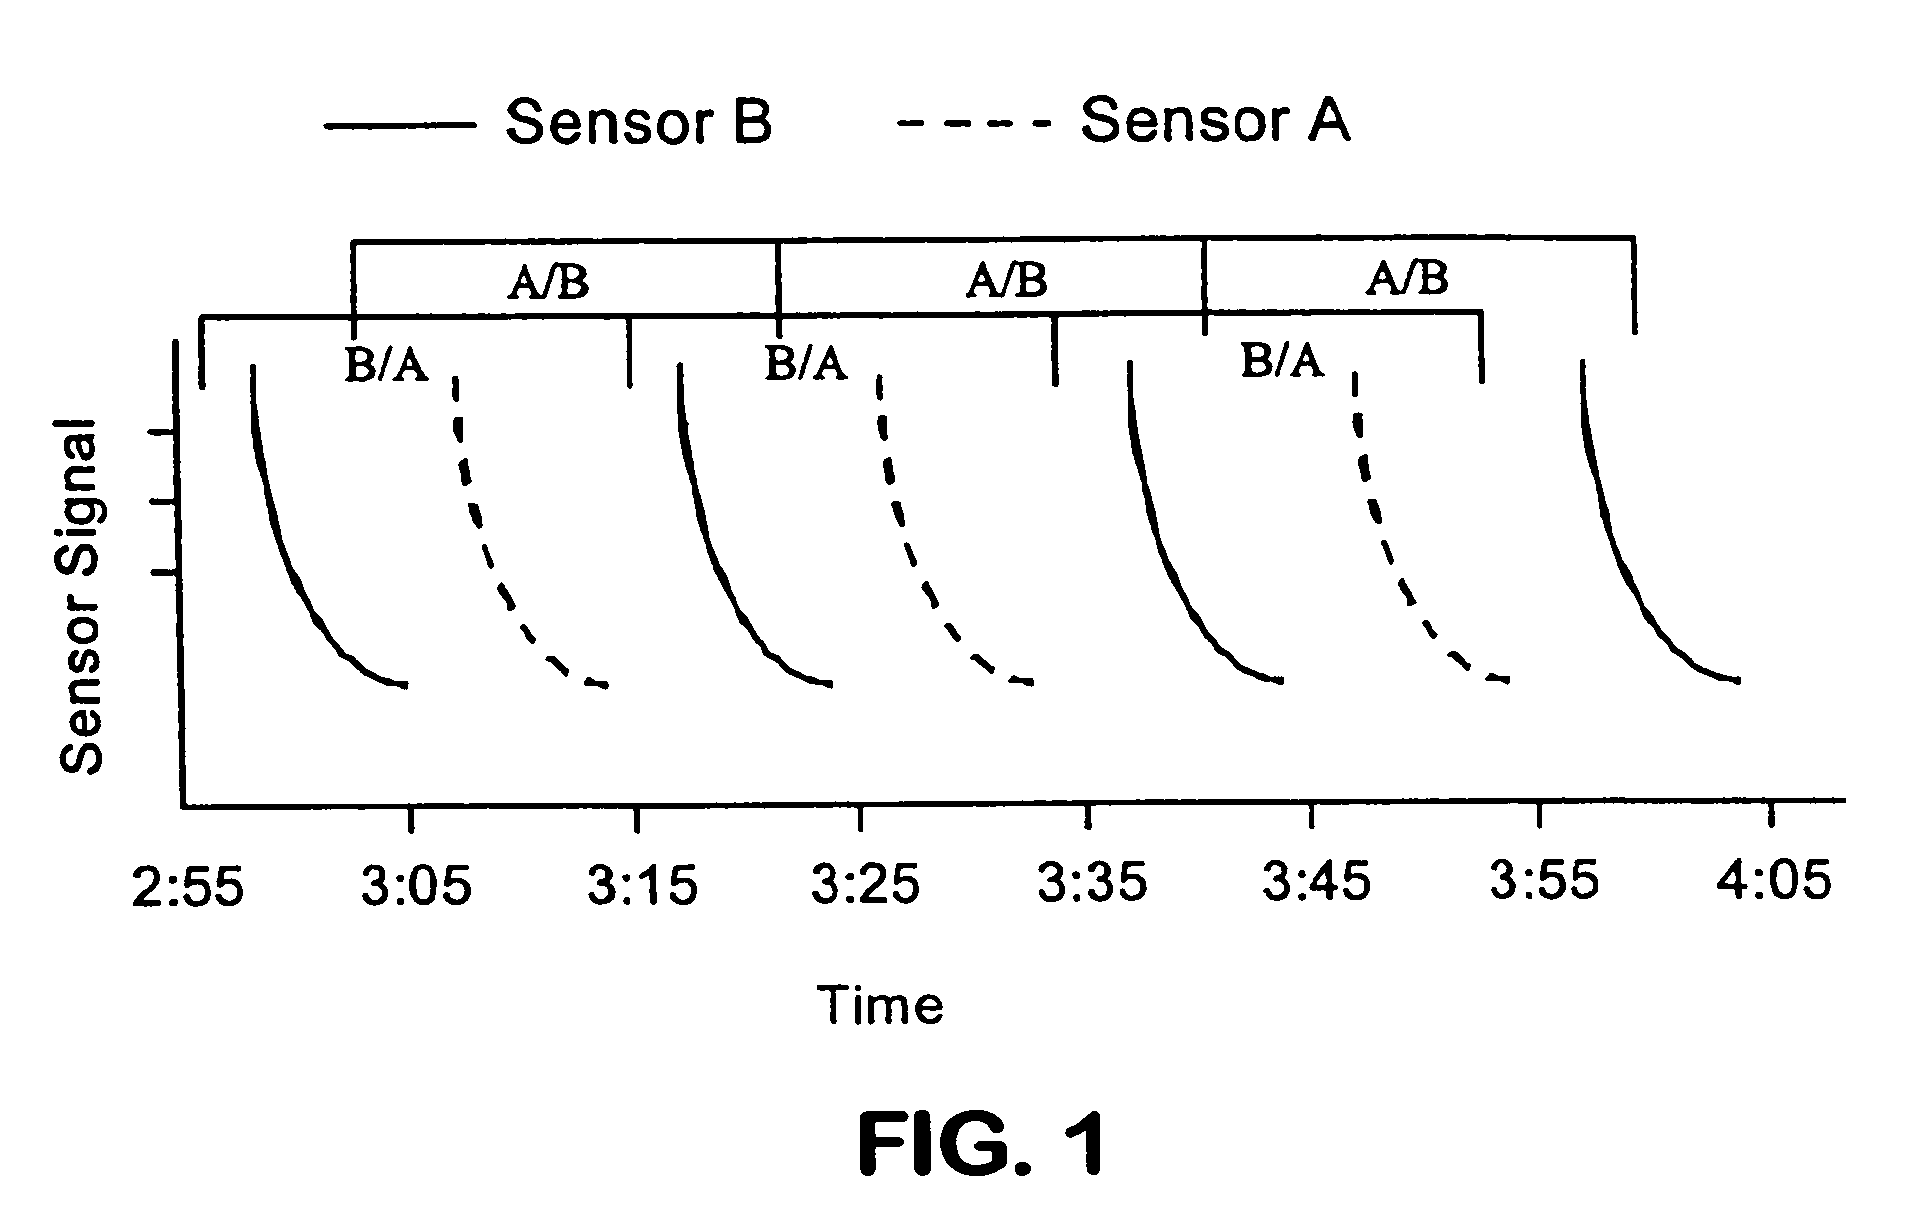 Methods for computing rolling analyte measurement values, microprocessors comprising programming to control performance of the methods, and analyte monitoring devices employing the methods